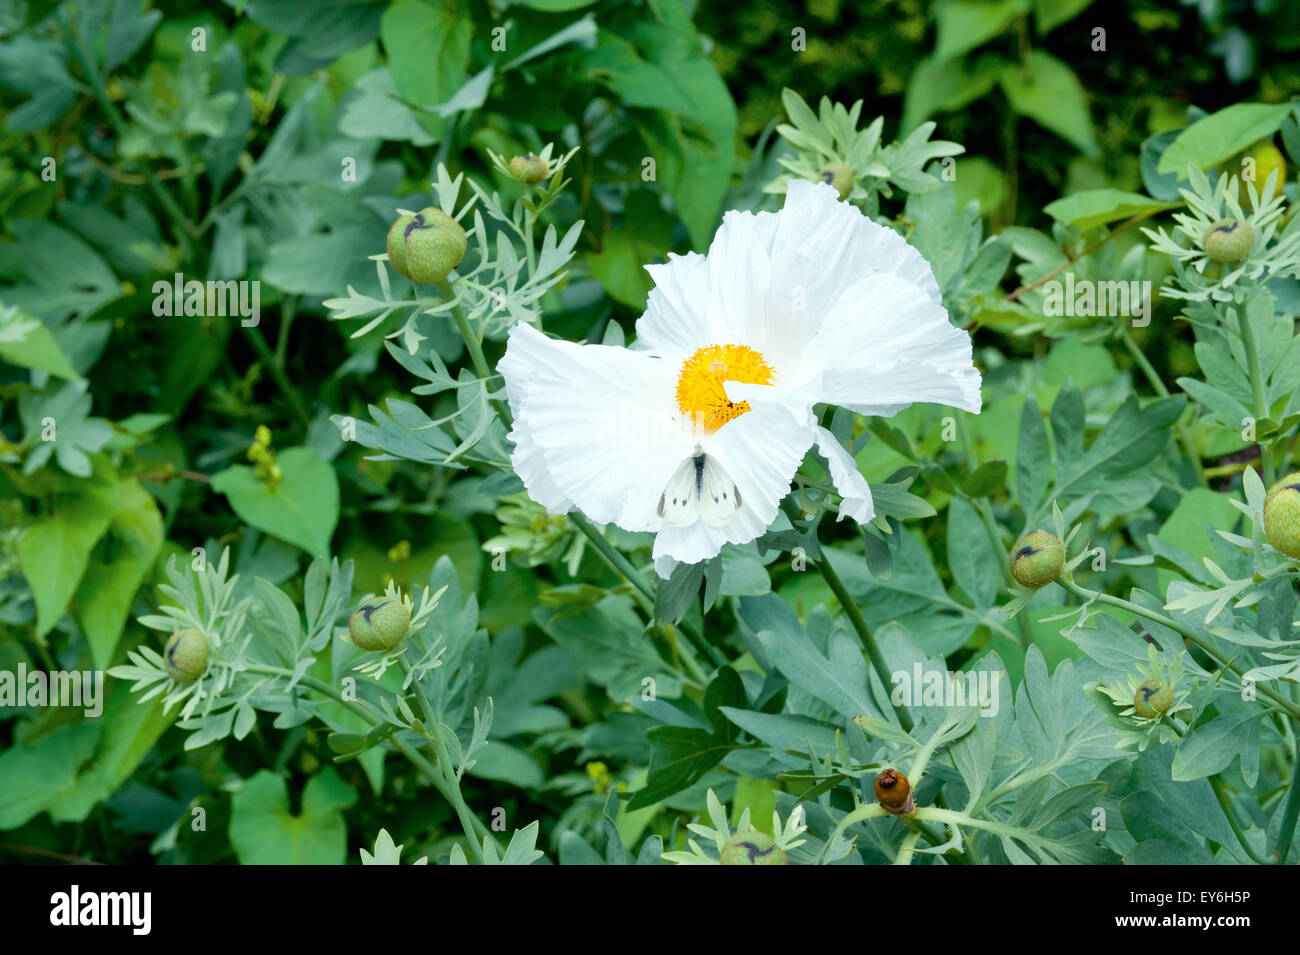 Pua kala (literally rough flower) is a member of the poppy family (Papaveraceae) Stock Photo